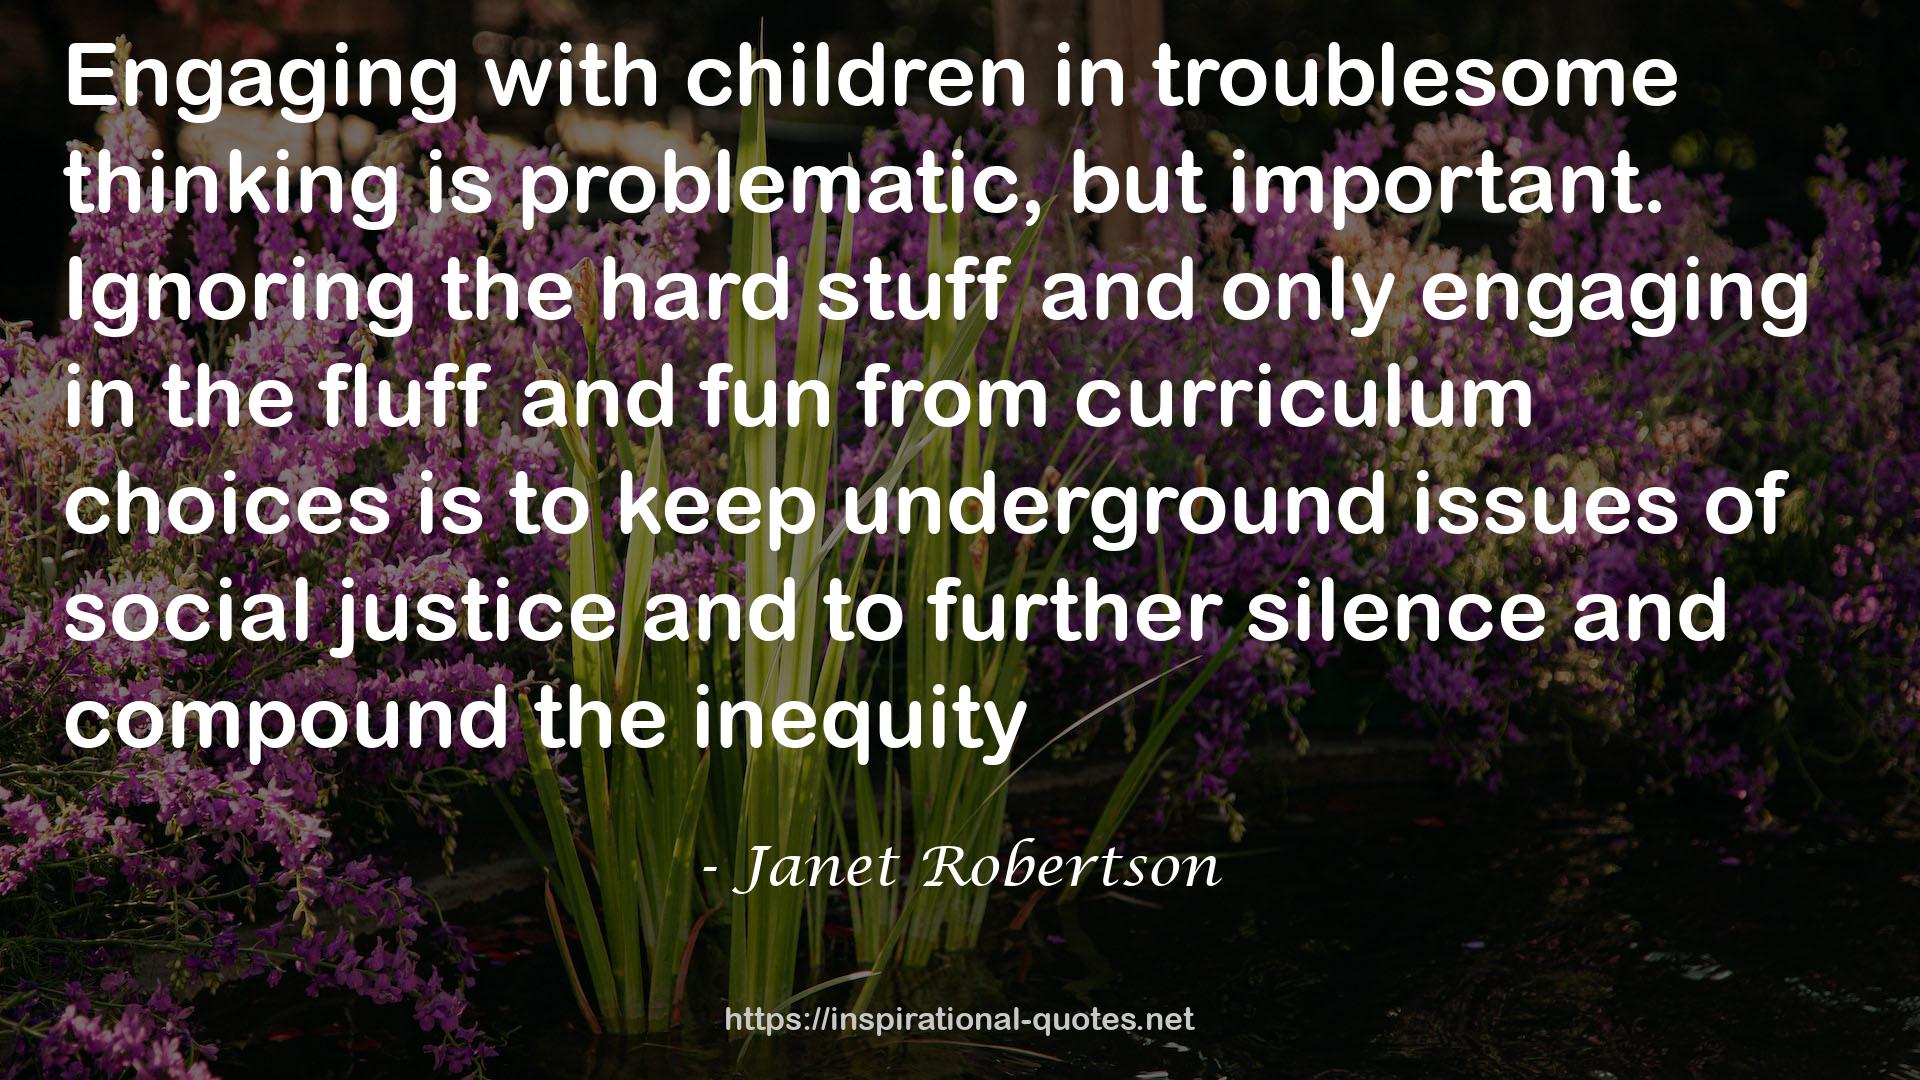 Janet Robertson QUOTES